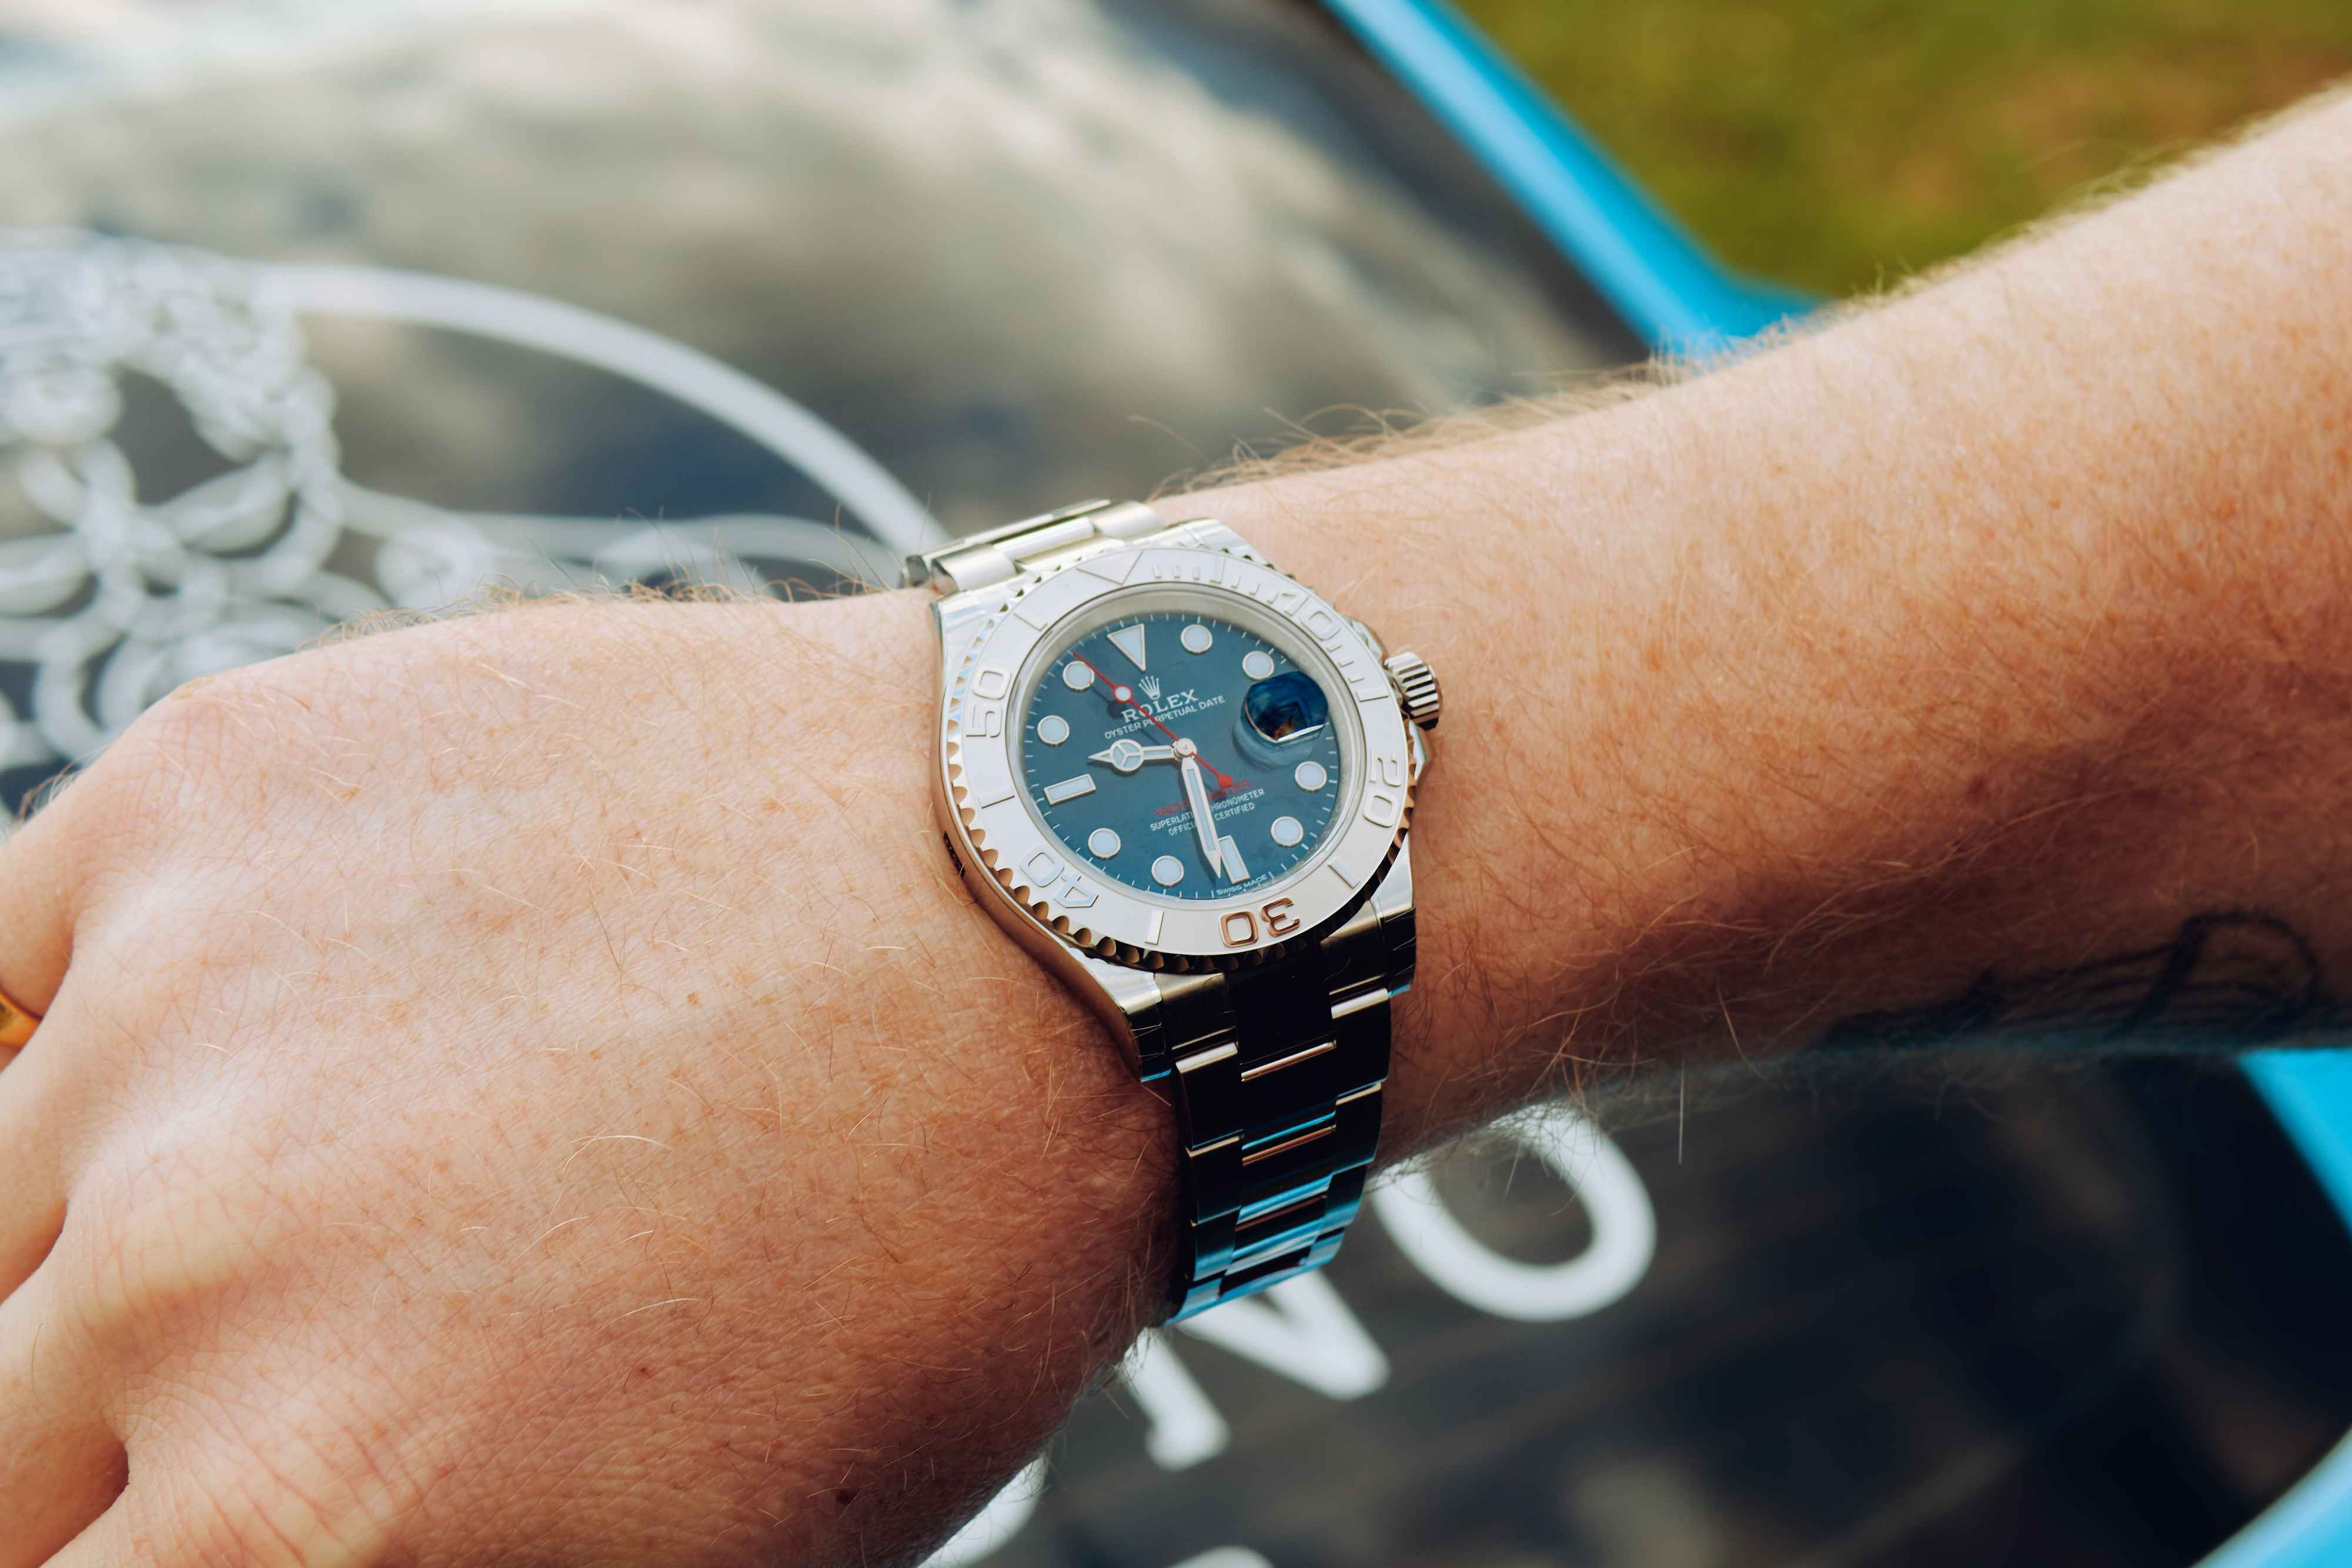 Rolex Yacht-master Slate and Blue Dial 40mm (Model #: 126622) 